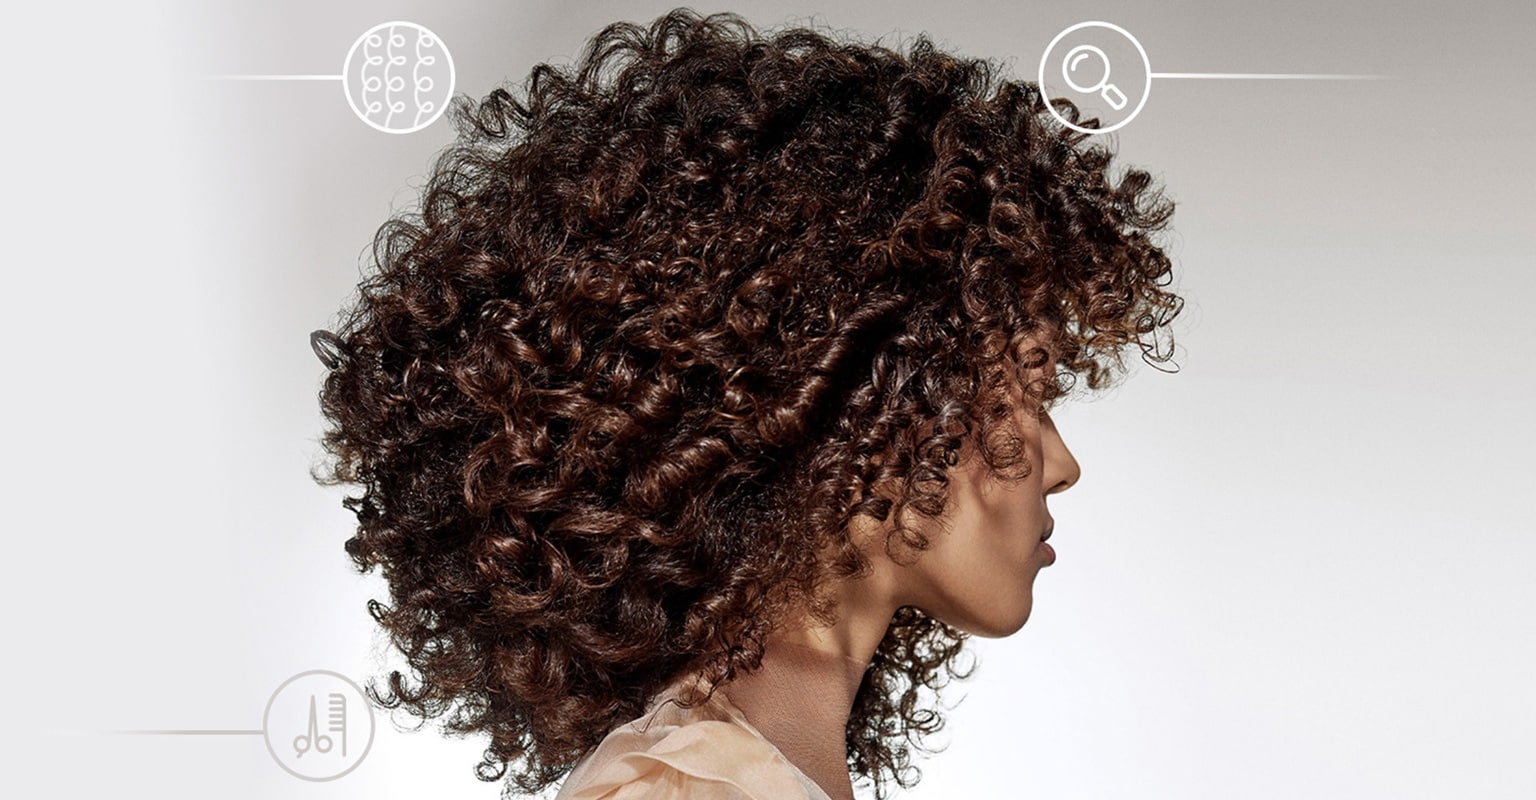 Customise your hair care - take Aveda's Hair Quiz